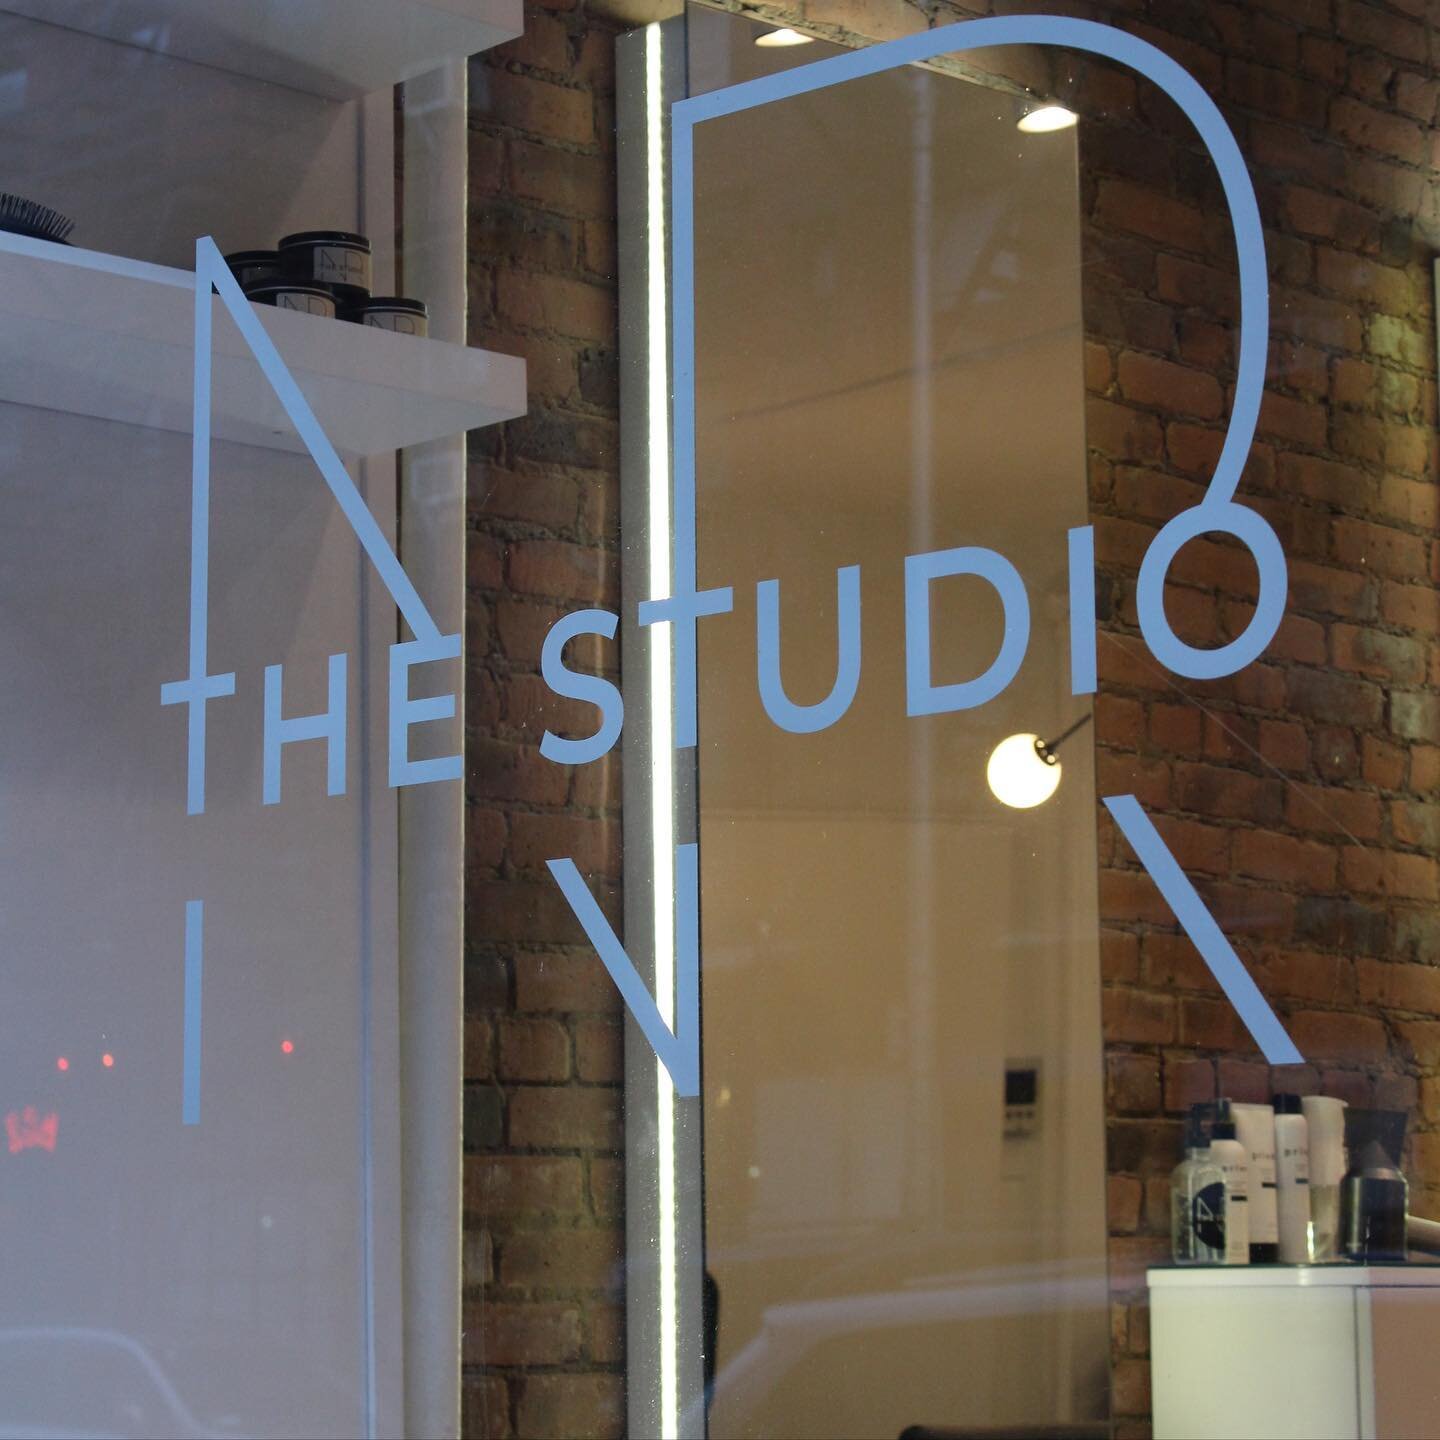 come visit us at 524 E 5th street &bull; www.thestudionr.com #nychairsalon #eastvillagenyc